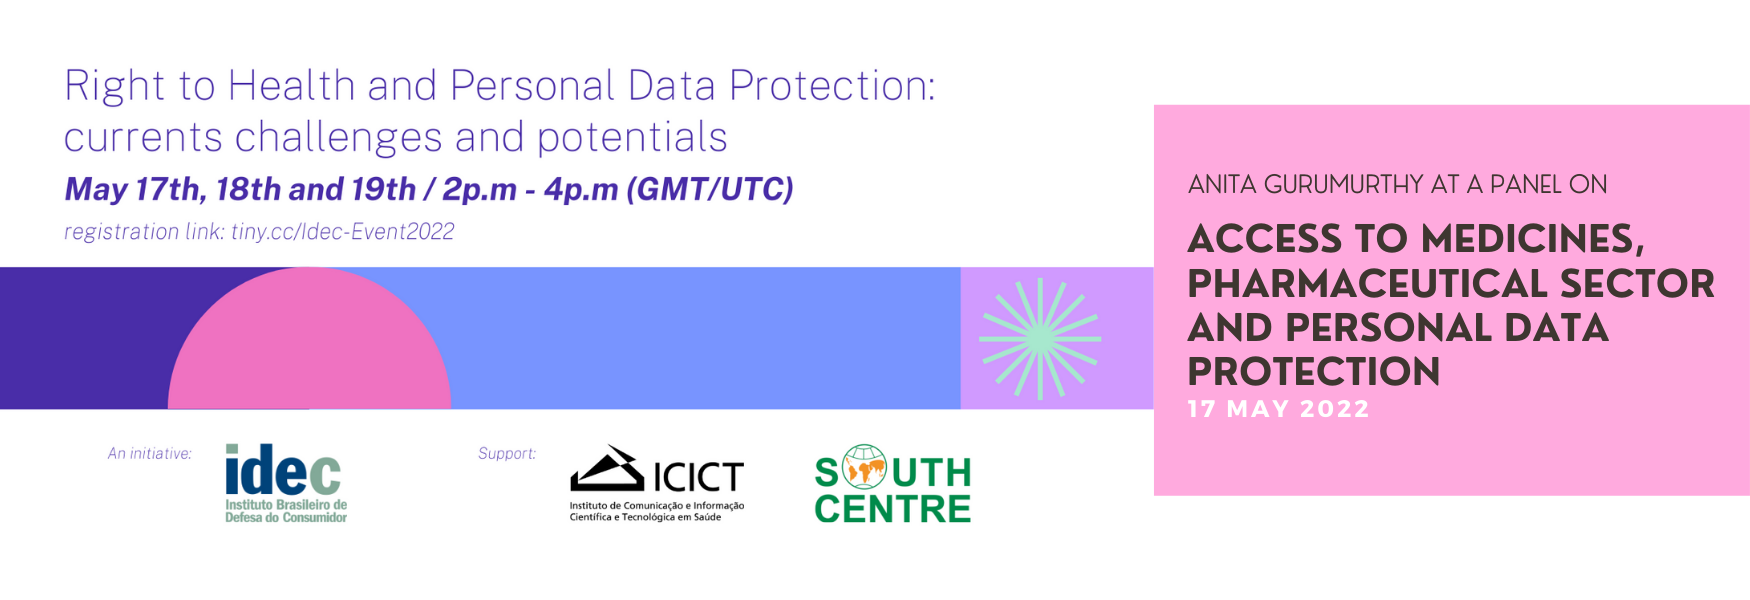 Right to Health and Personal Data Protection: Currents Challenges and Potentials